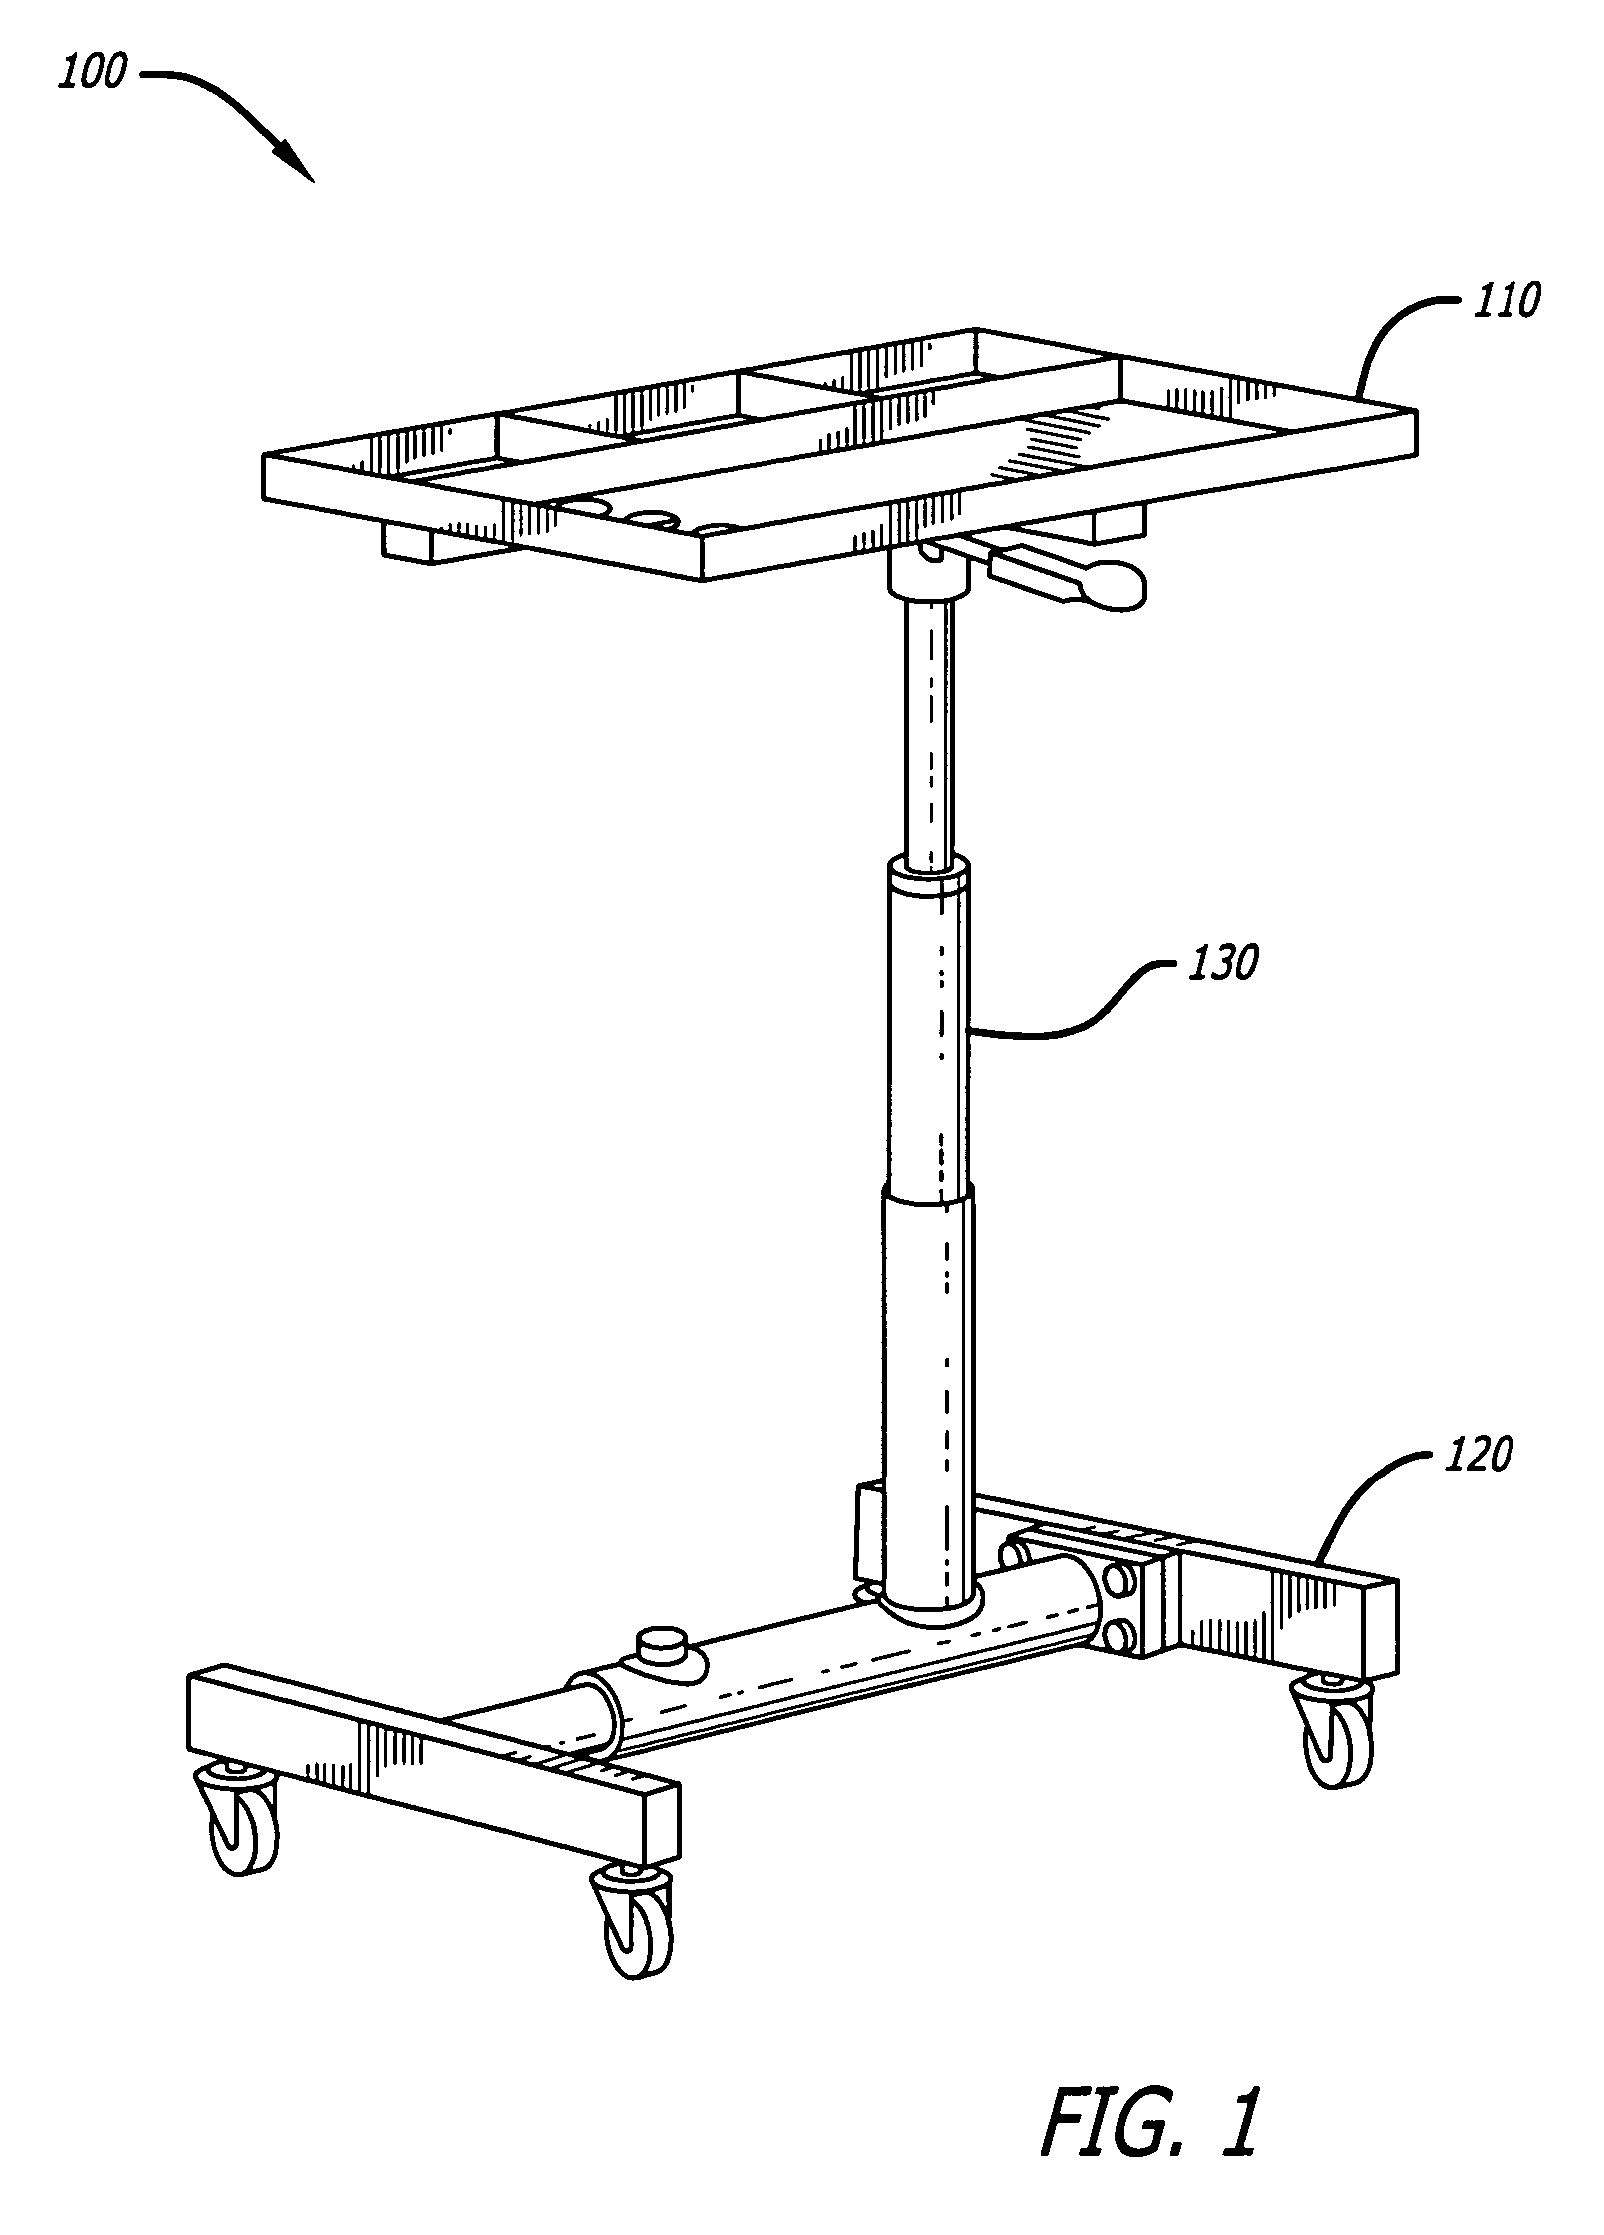 Pneumatic table assembly